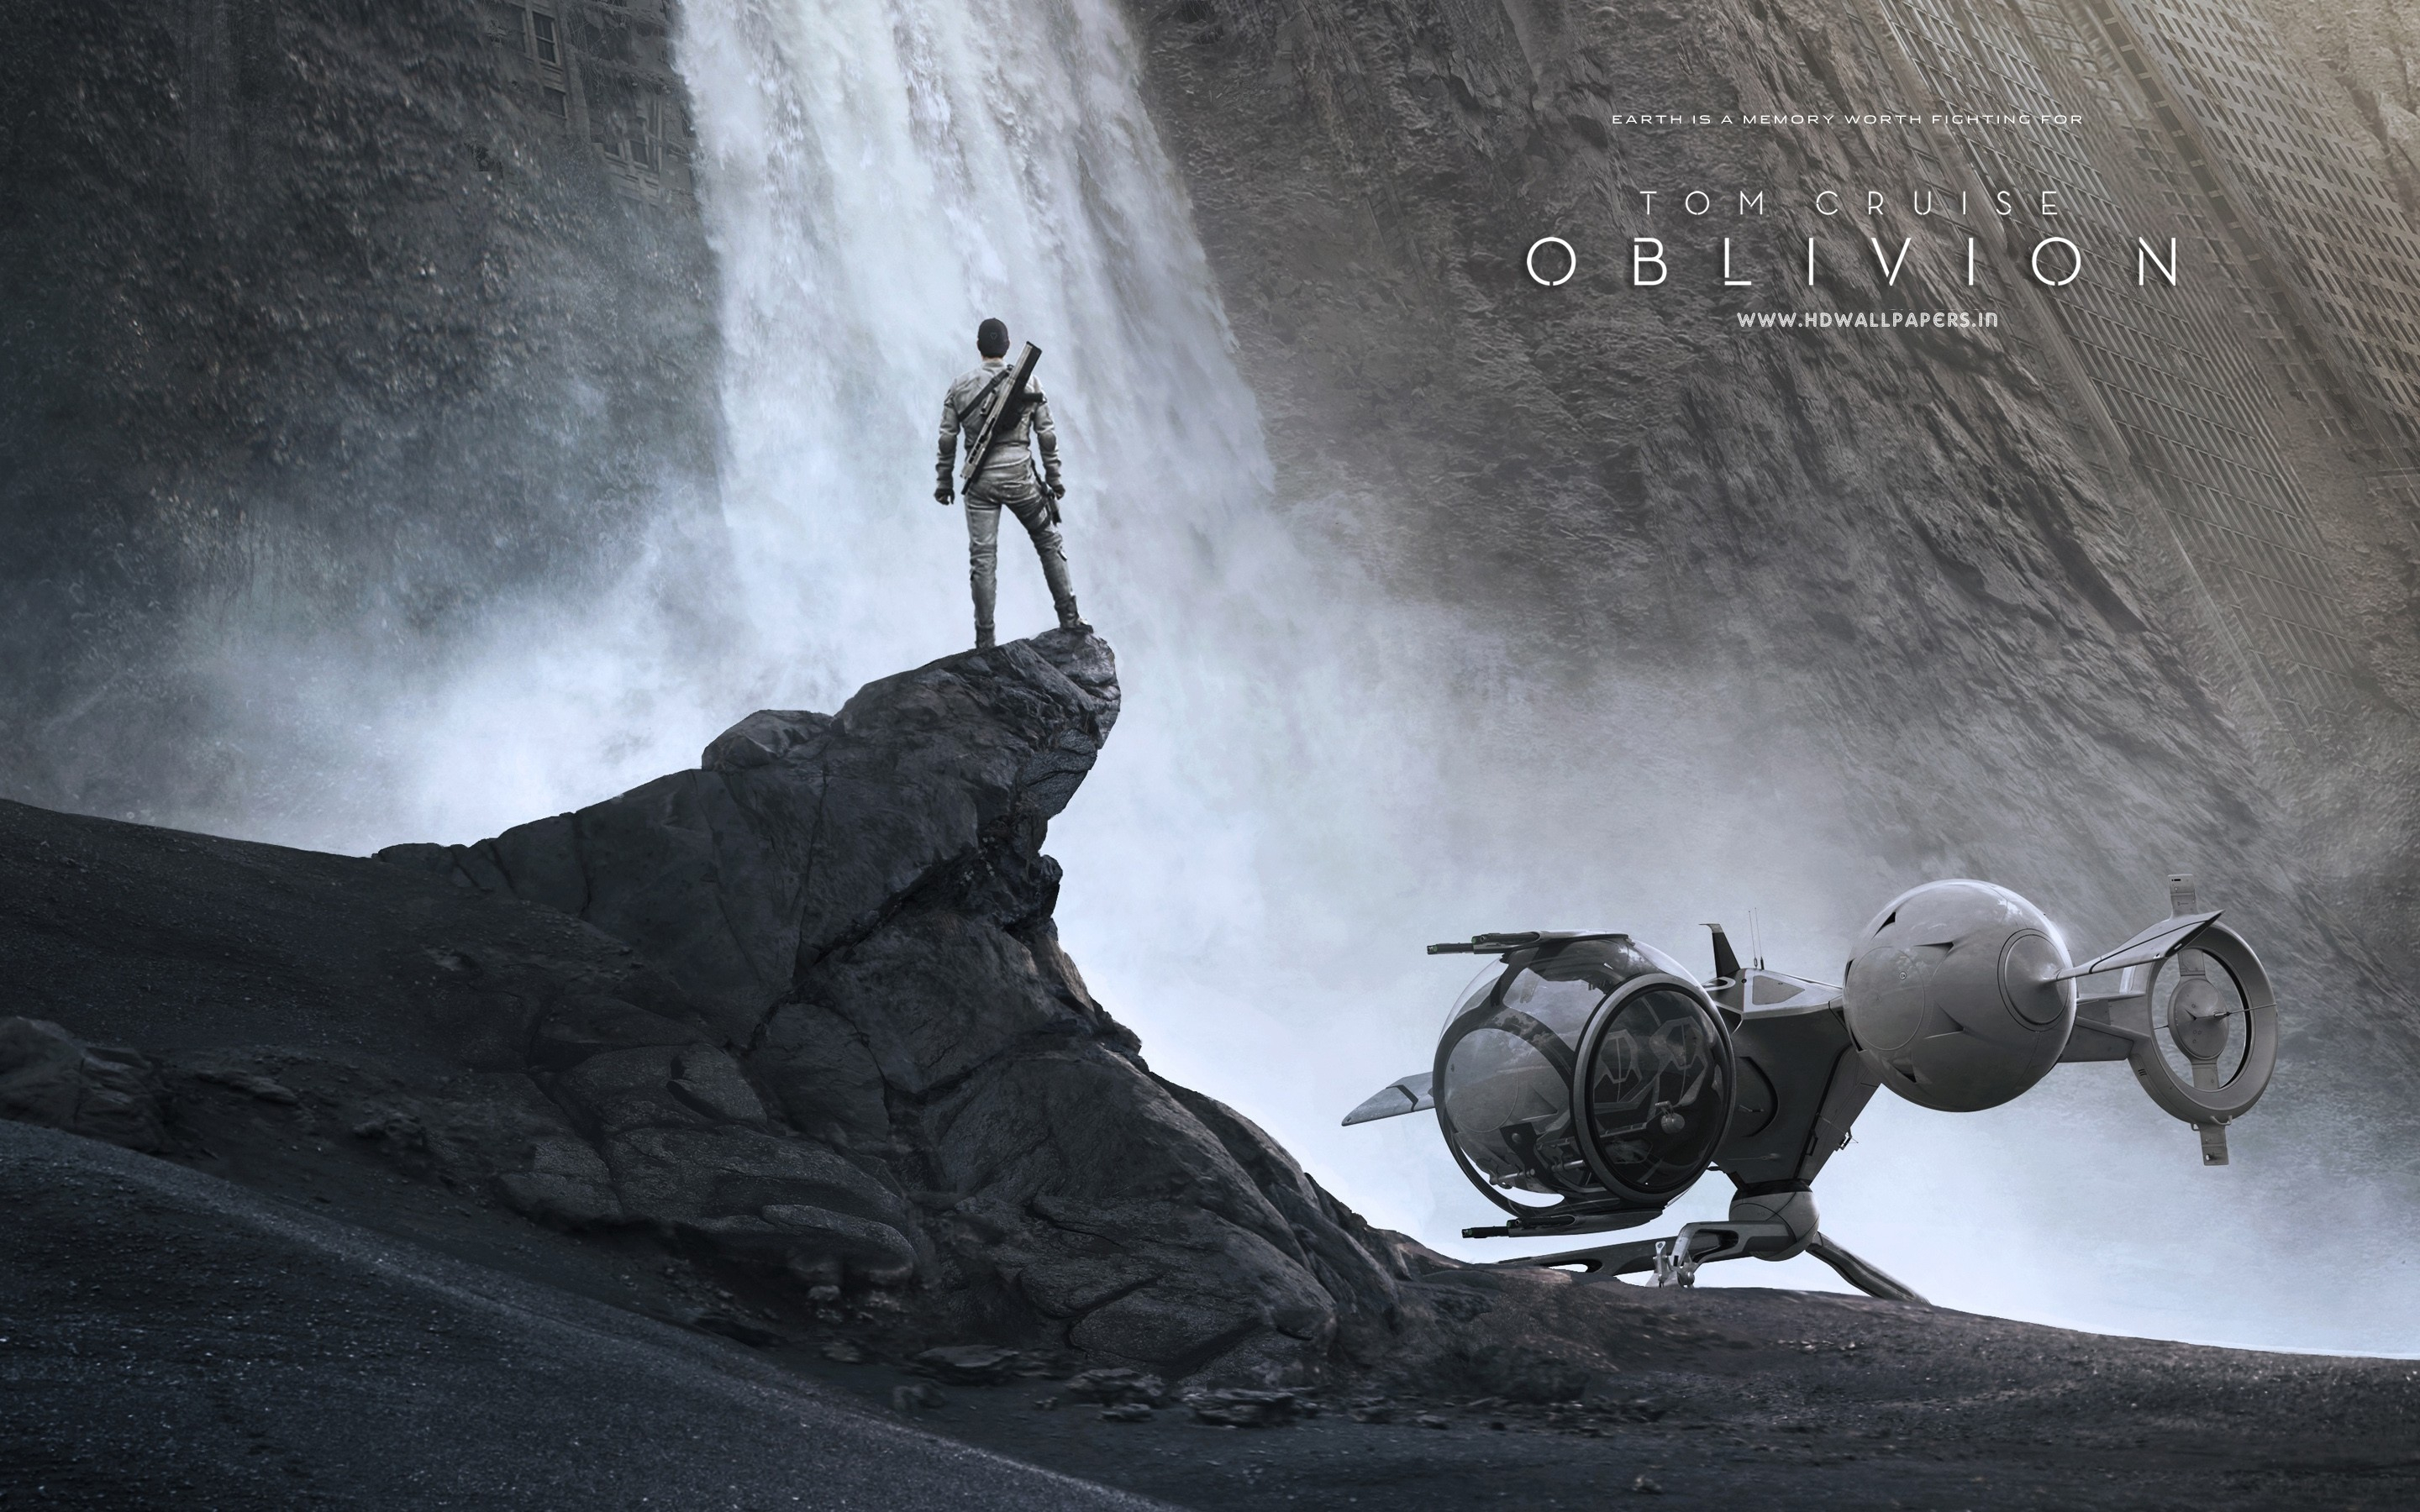 2880x1800 Oblivion wallpaper &Acirc;&middot;&acirc;&#145;&nbsp; Download free beautiful HD backgrounds for desktop and mobile devices in any resolution: desktop, Android, iPhone, iPad 1920x1080, 1366x768, 360x640, 1024x768 etc.